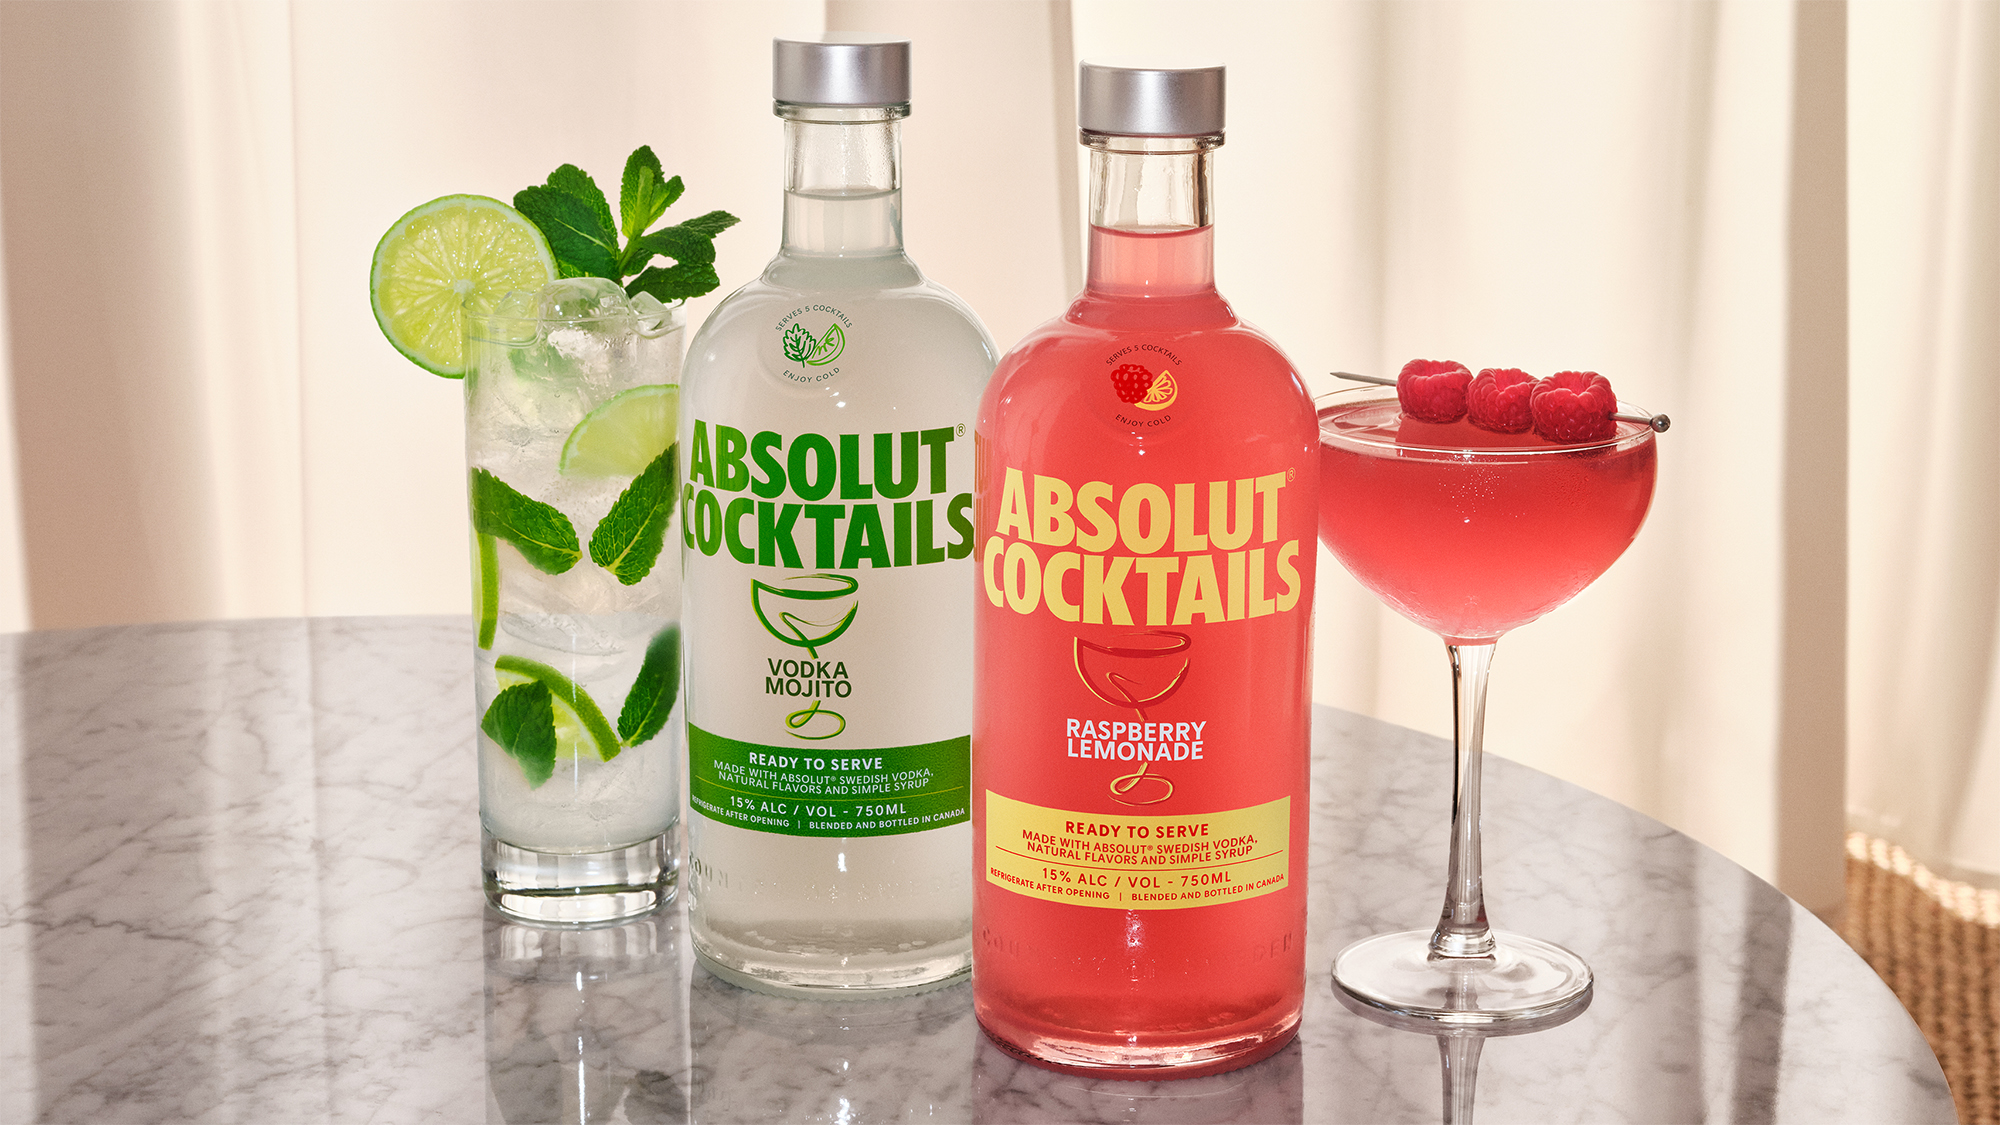 Absolut Launches Pre-Bottled Cocktails: Vodka Mojito And Raspberry Lemonade